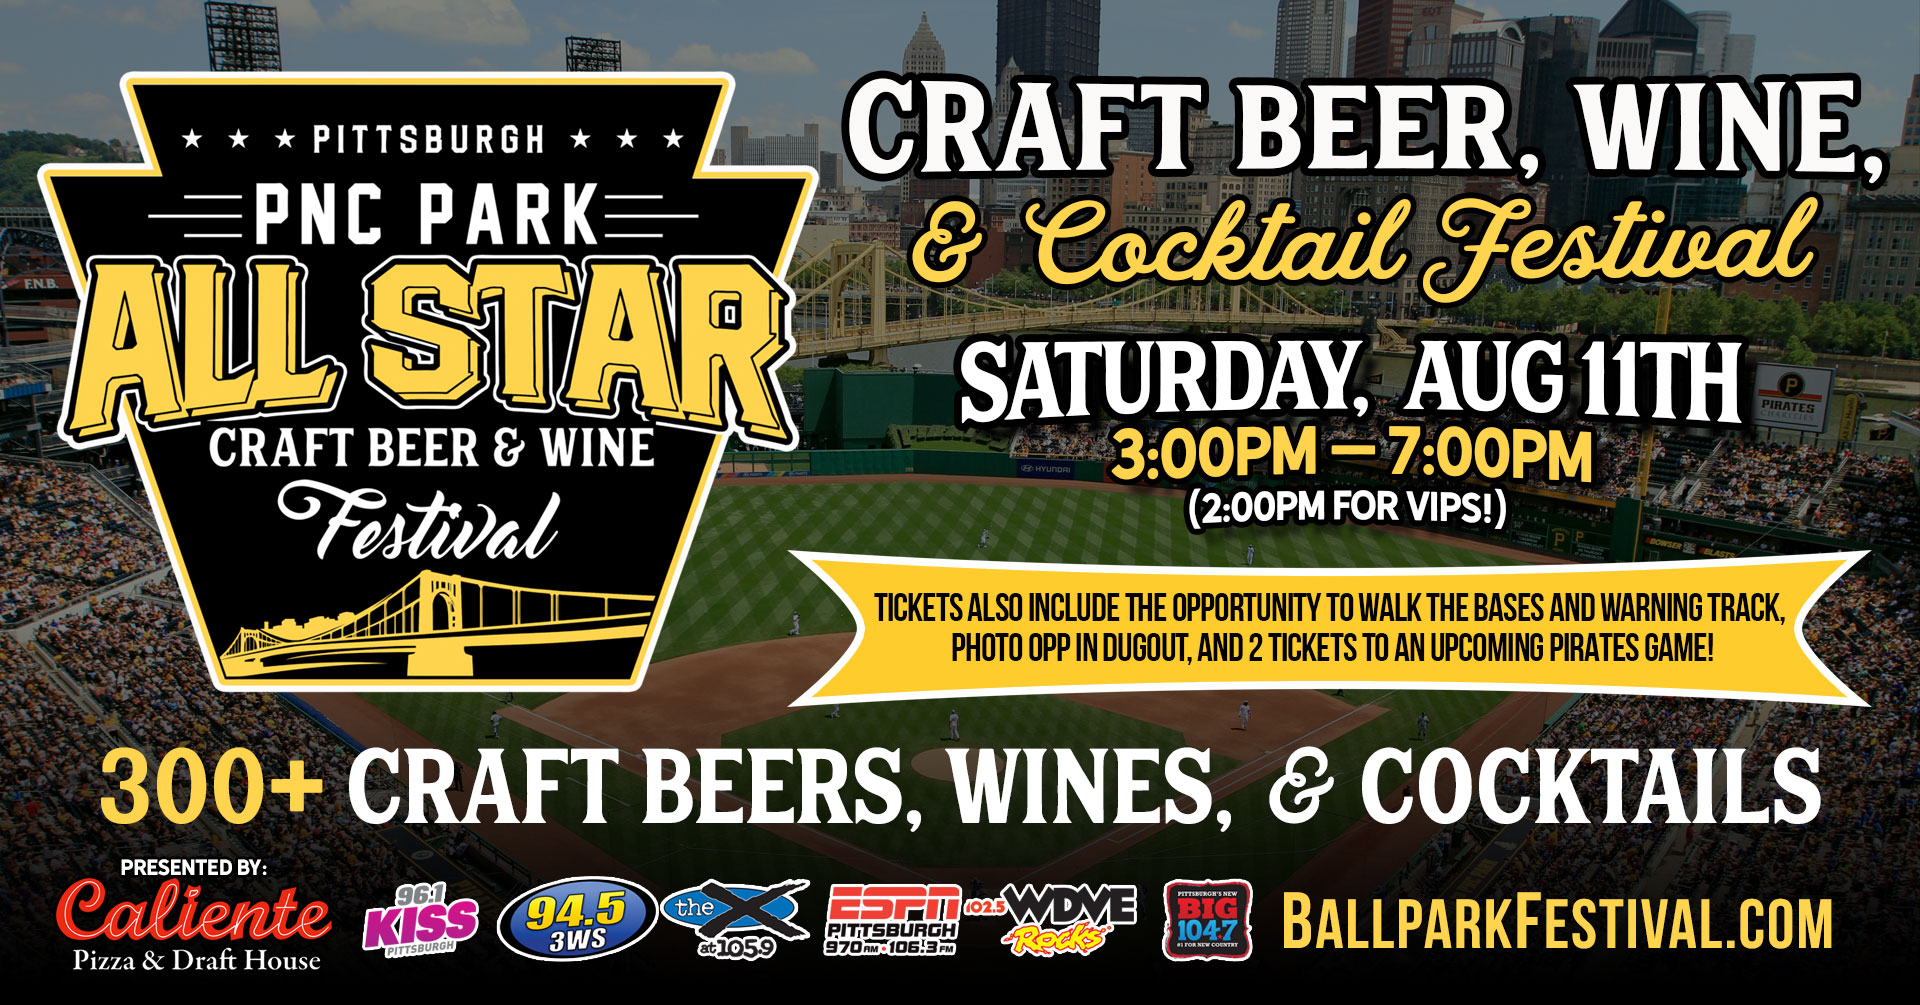 The Pittsburgh Craft Beer, Wine, and Cocktail Festival banner image